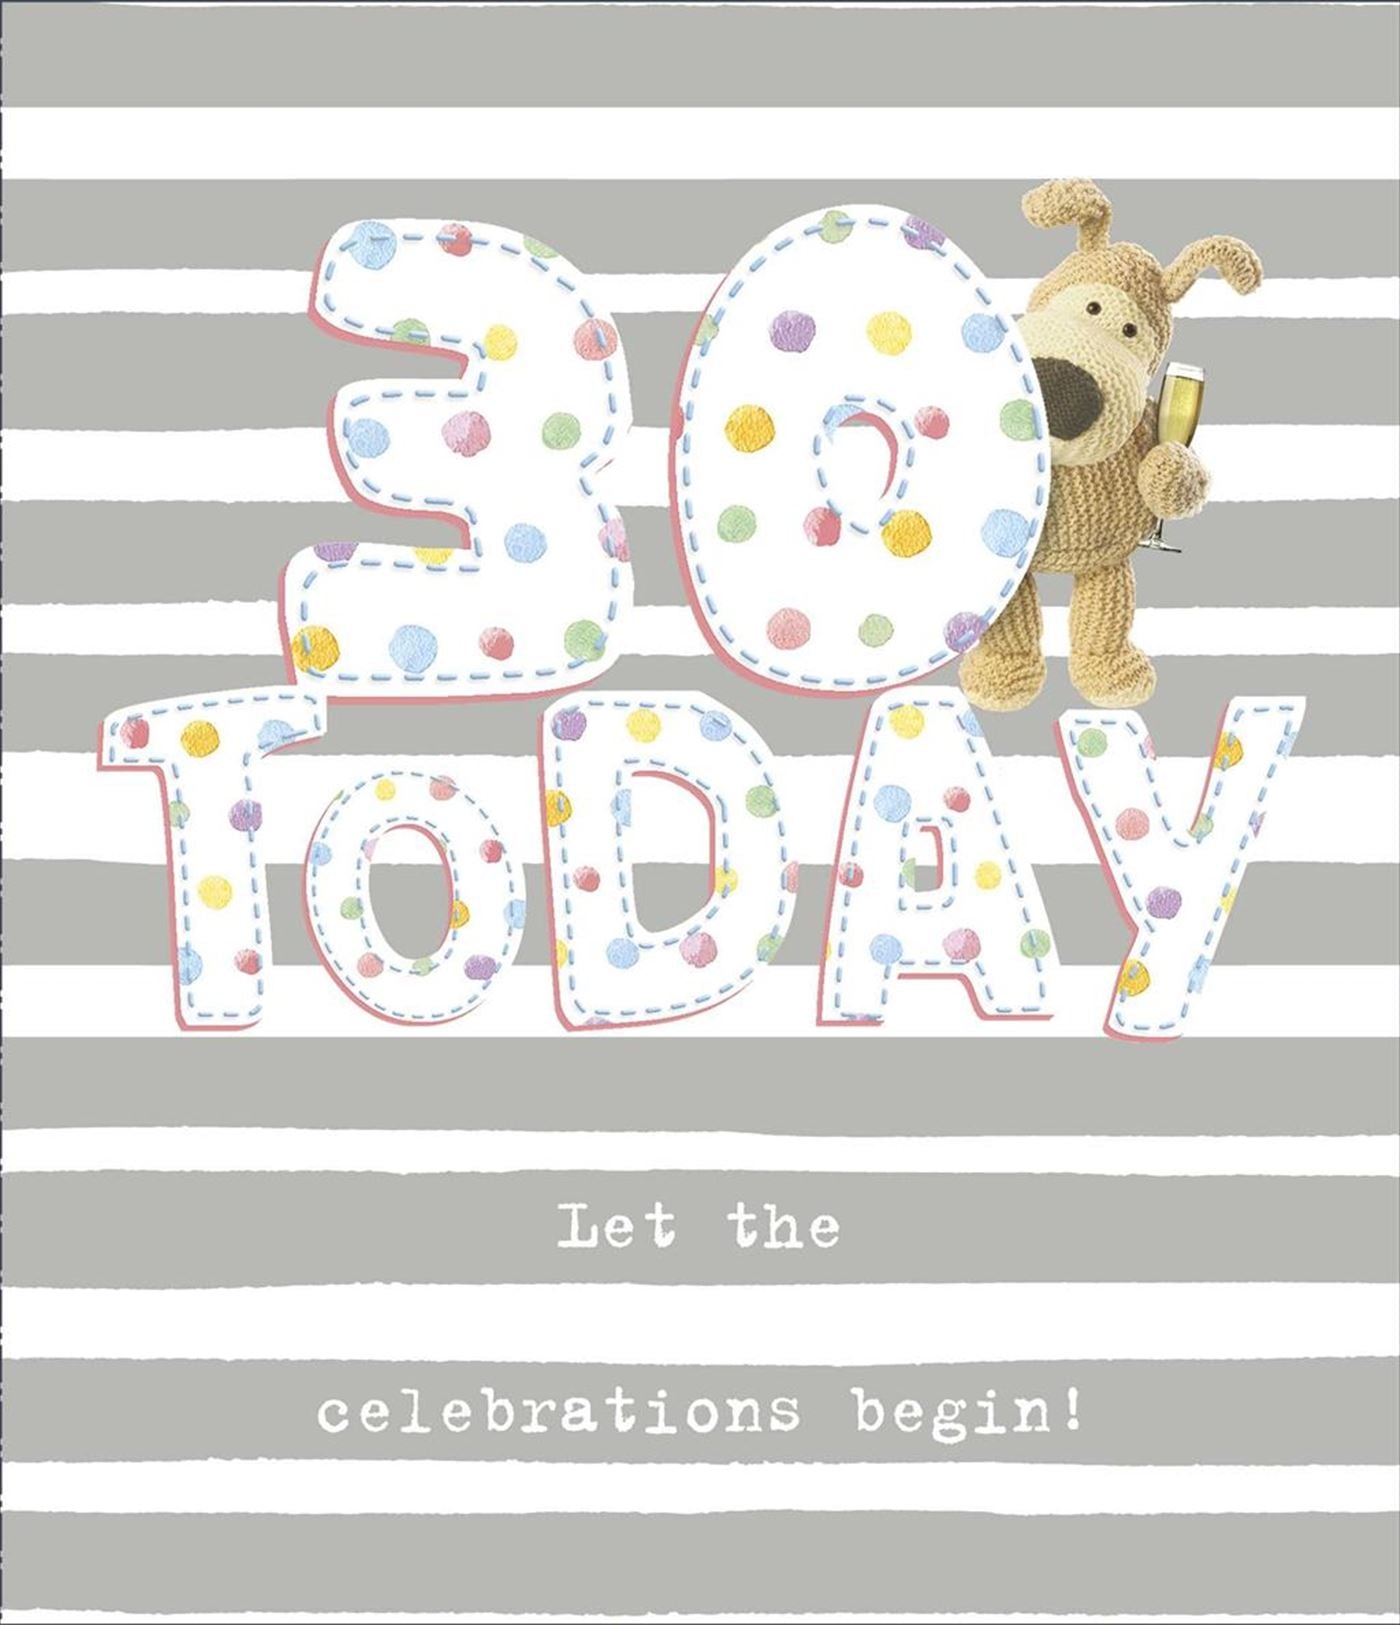 Front of 30 Today Boofle Celebrations Begin Greetings Card